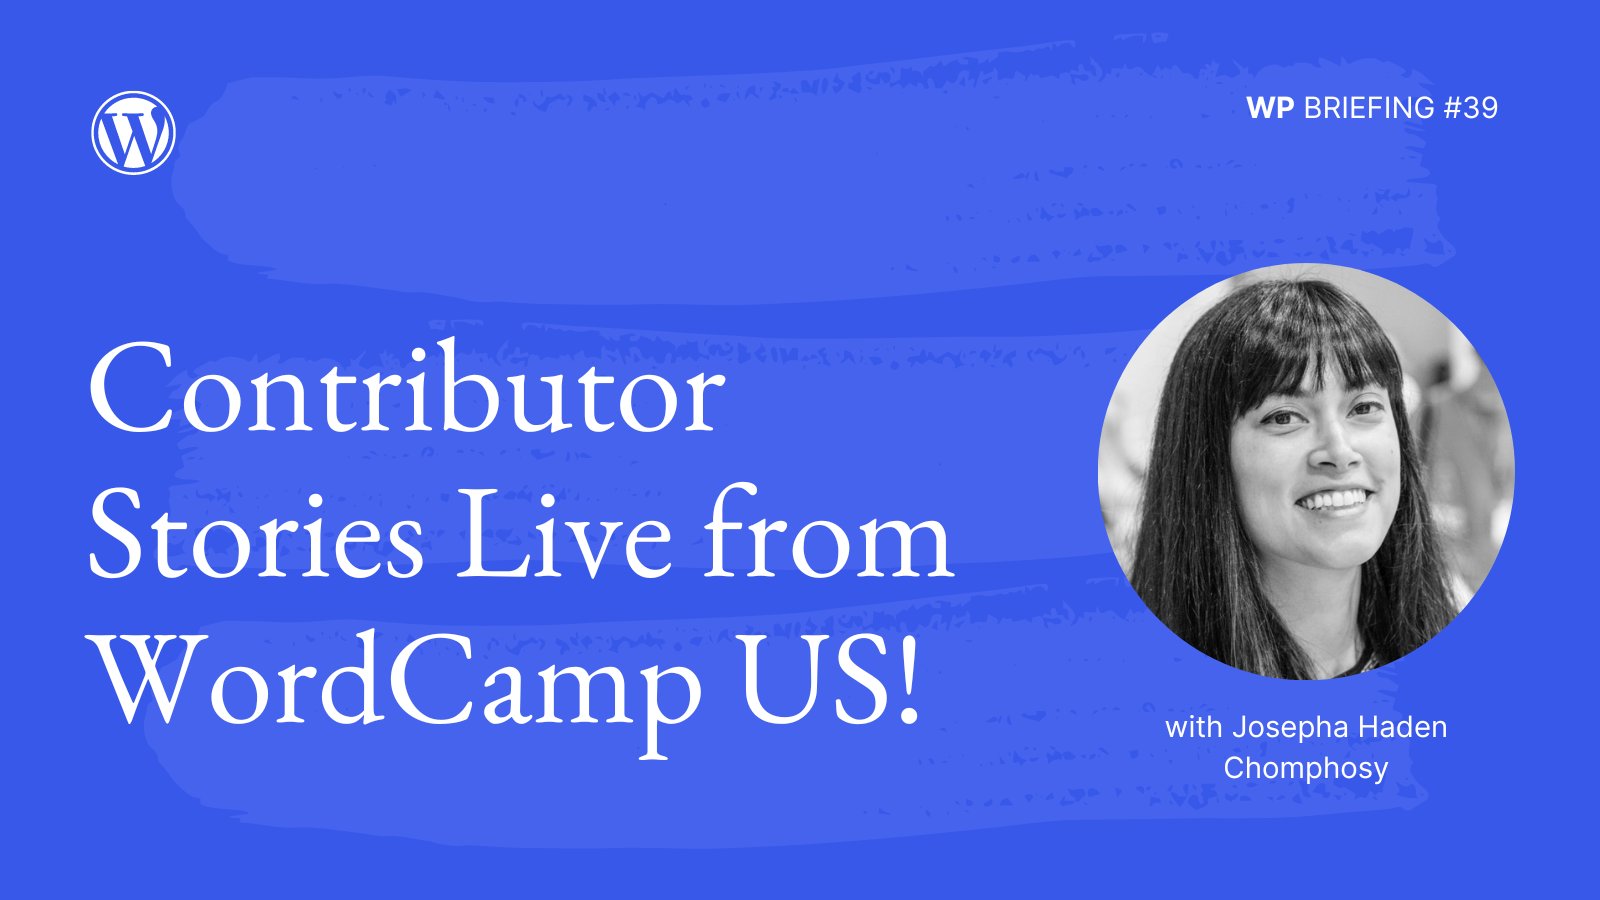 Blue background with image of Josepha Haden Chomphosy and text, "WP Briefing #39. Contributor Stories Live from WordCamp US! With Josepha Haden Chomphosy"